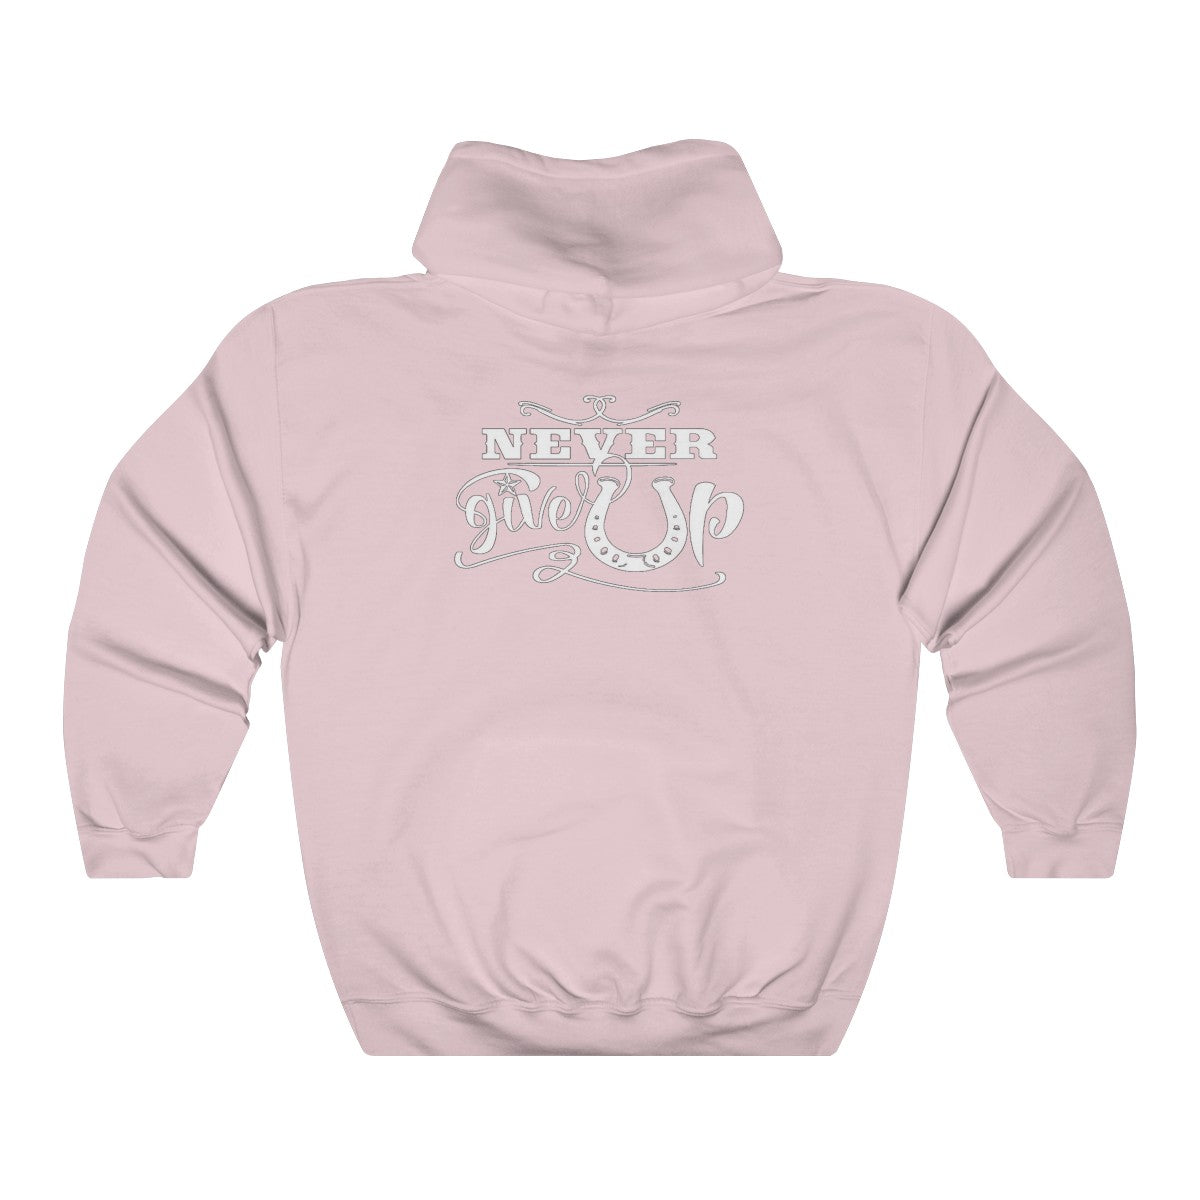 Never Give Up - Adult Unisex Heavy Blend™ Hooded Sweatshirt